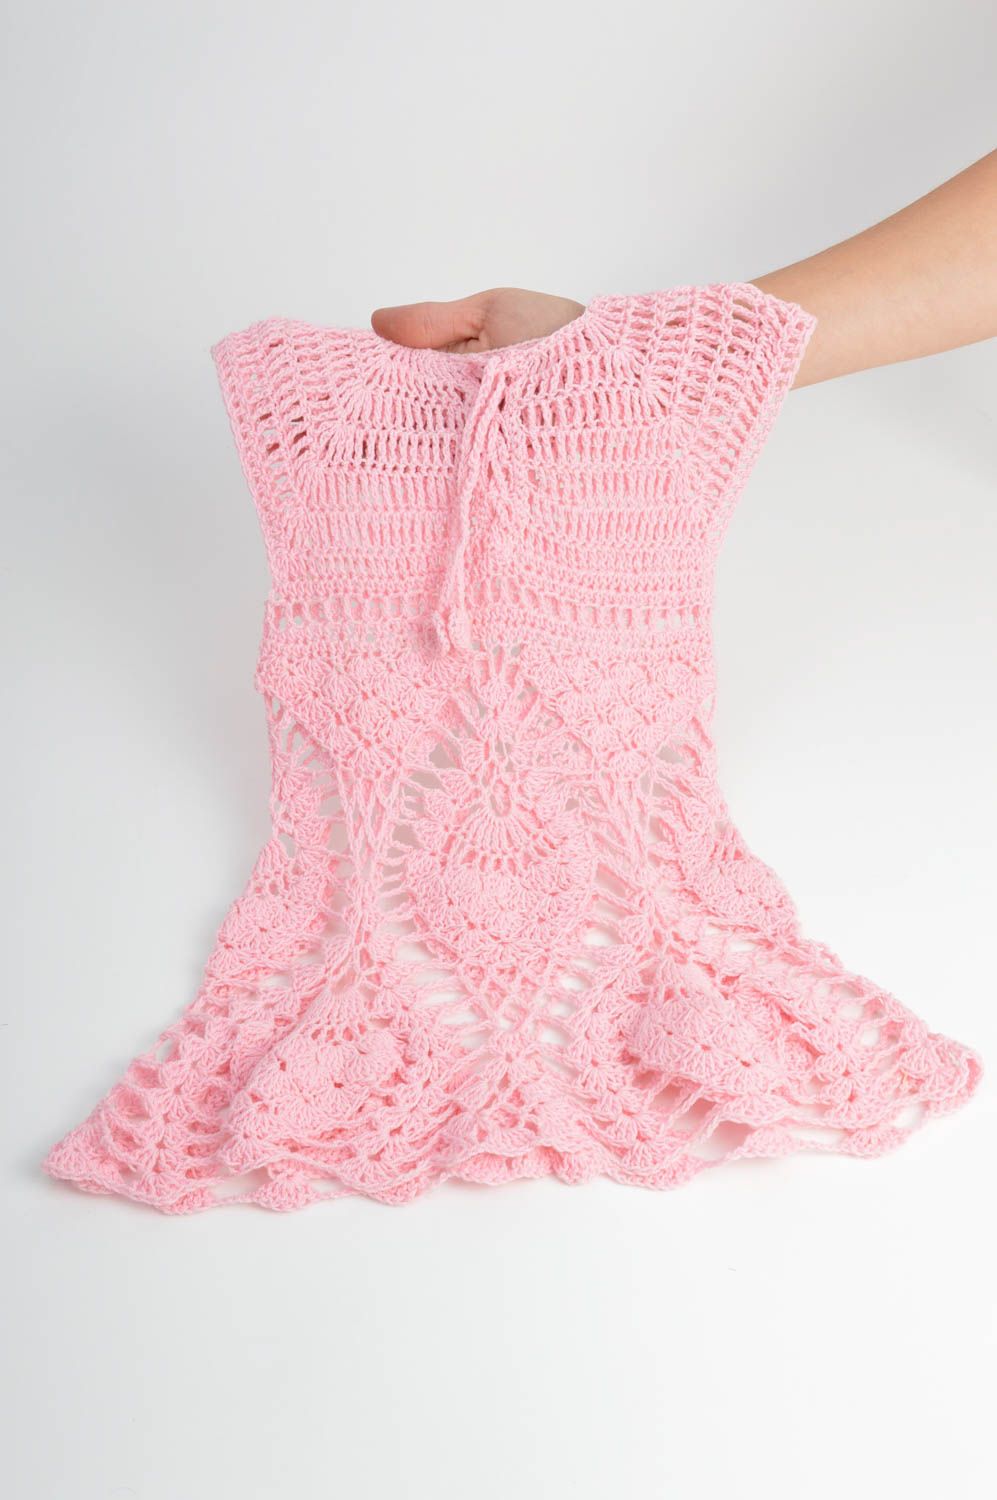 Beautiful crochet delicate dress made of cotton in pink color for baby girls photo 5